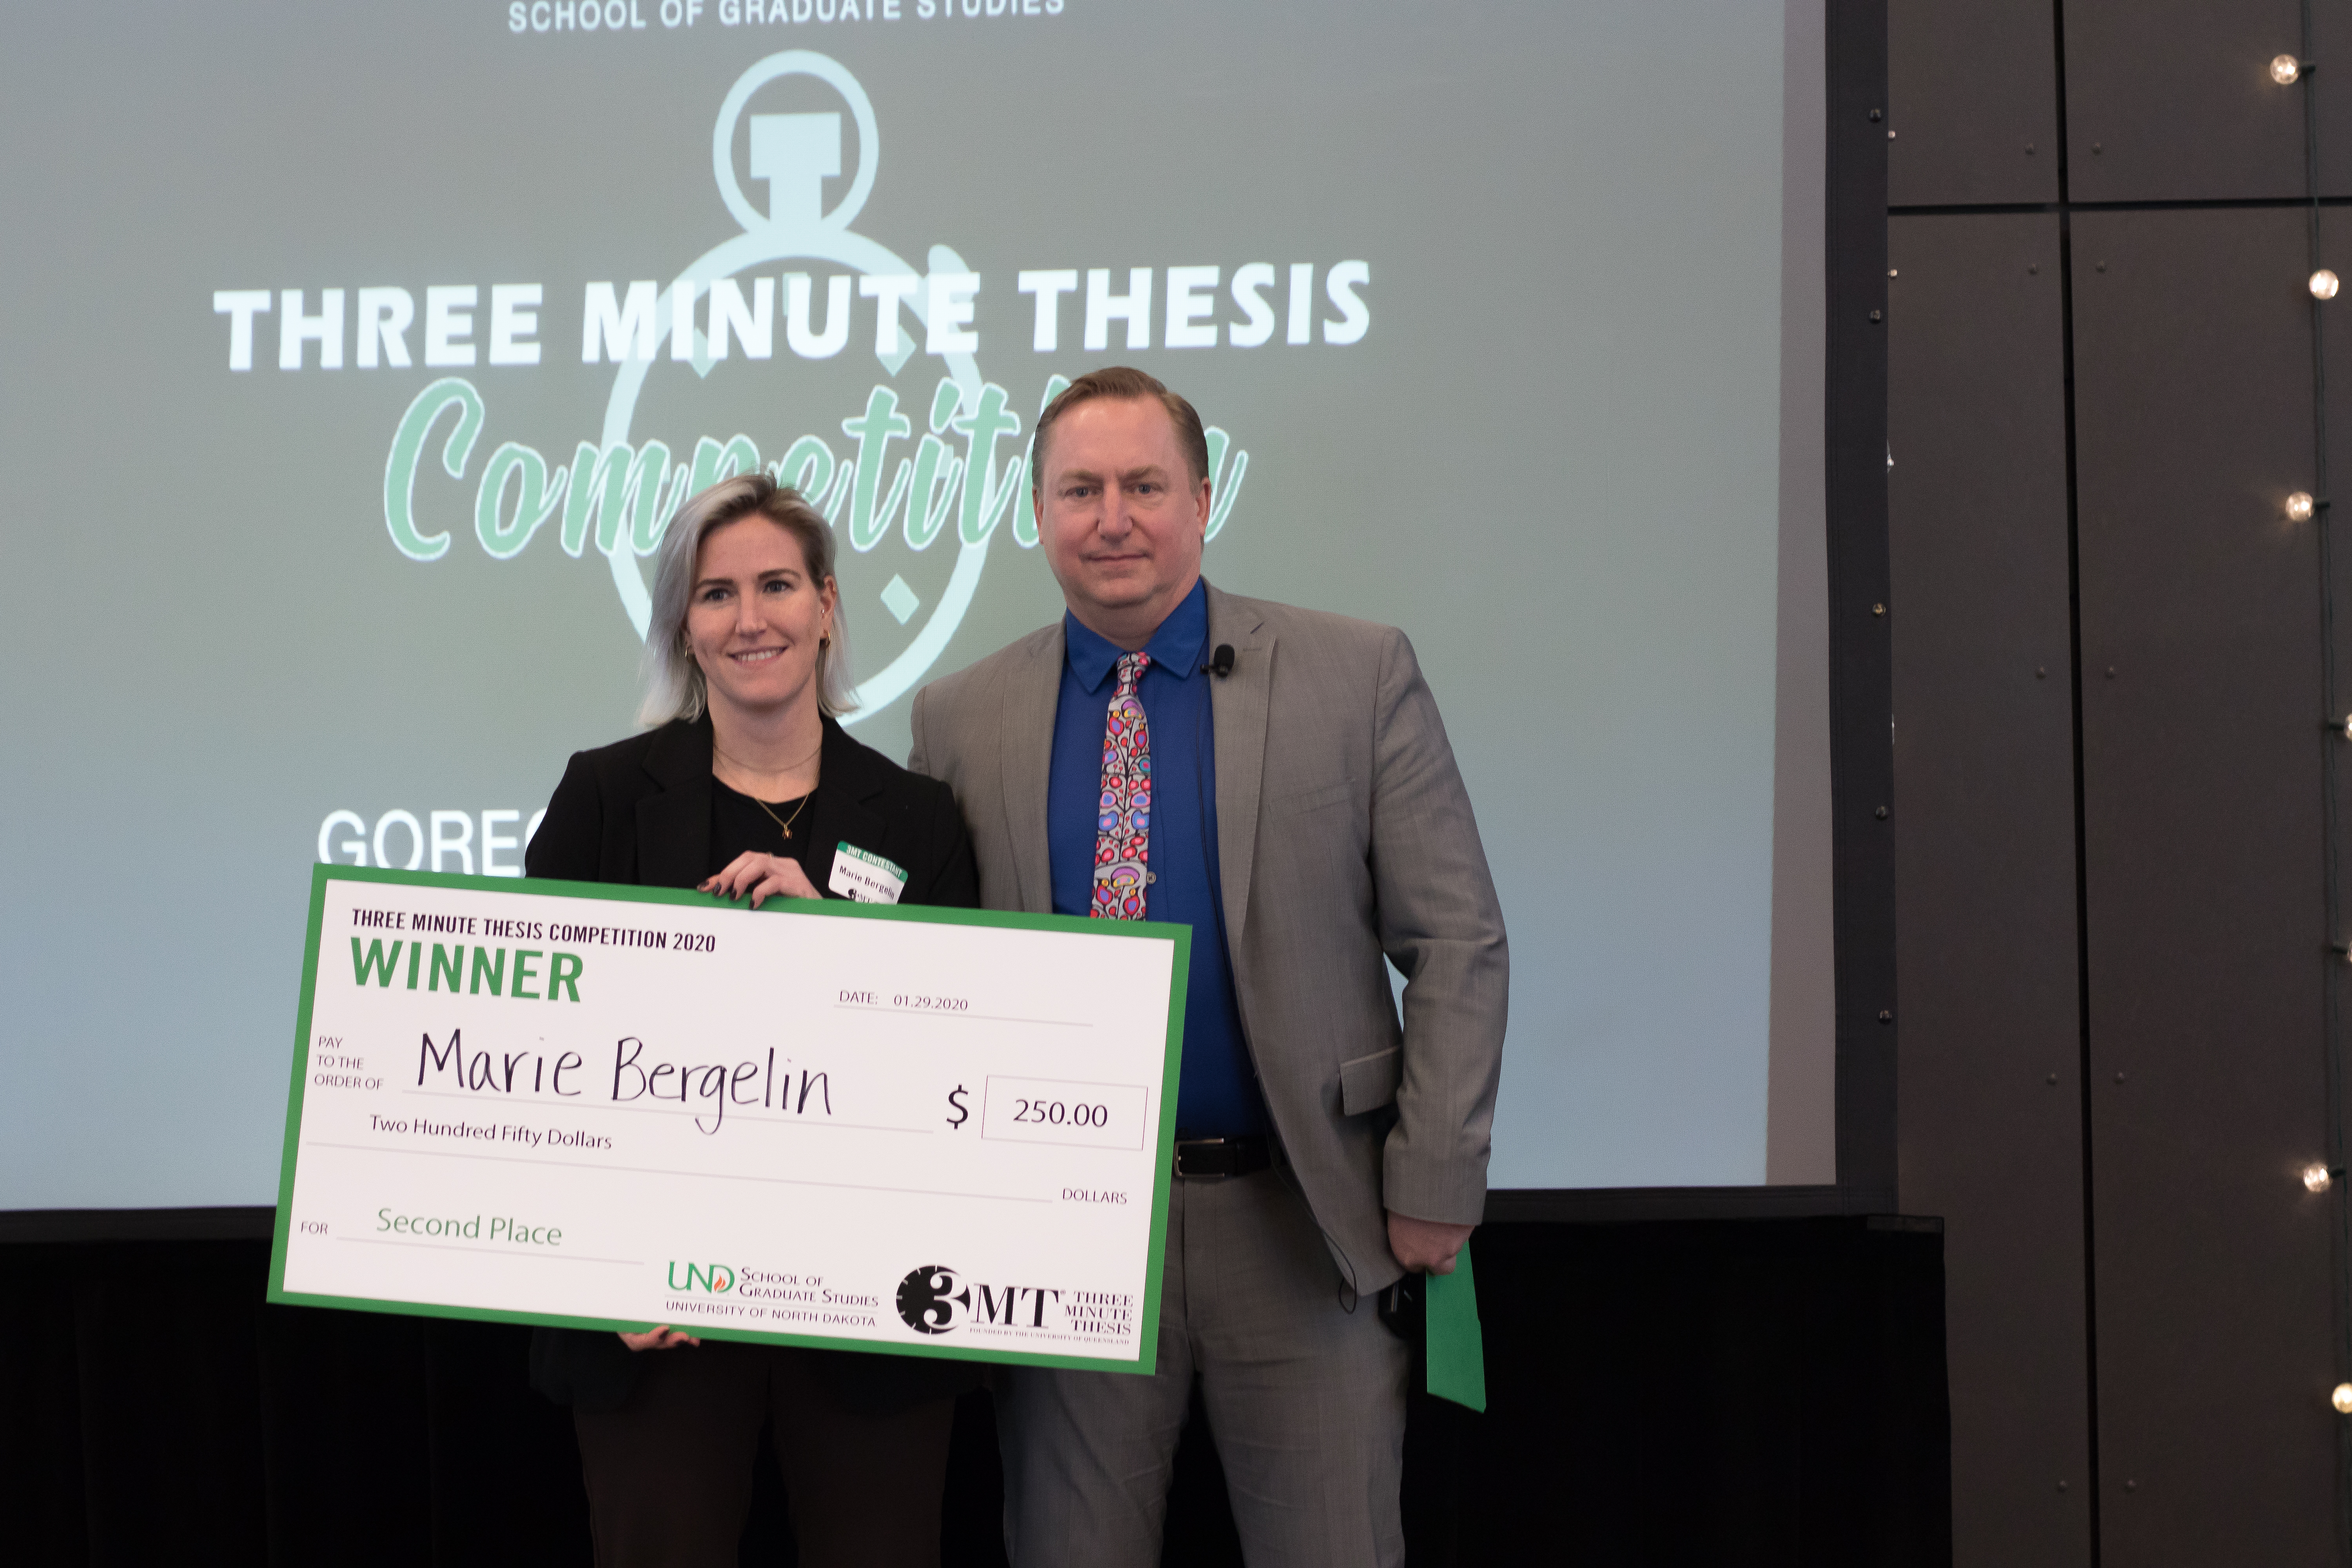 Marie Bergelin wins 2nd place at 3-Minute Thesis Competition